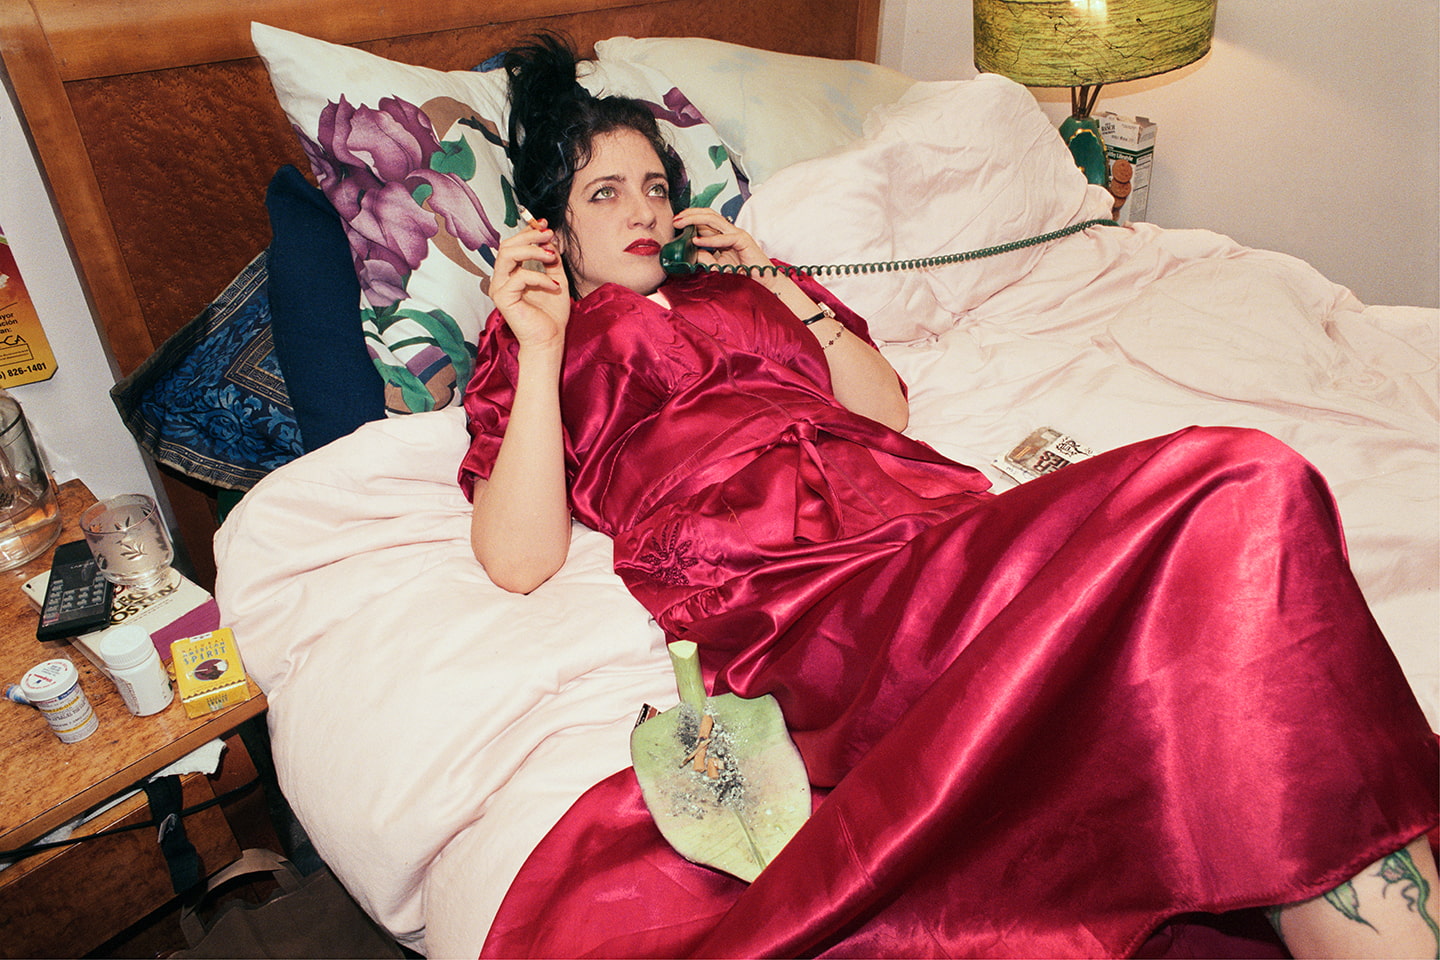 A person with dark hair holds a cigarette and a phone with a spiral cord. They wear a red satin dress or robe and have a leaf shaped ash tray. They are laying on a white bed.